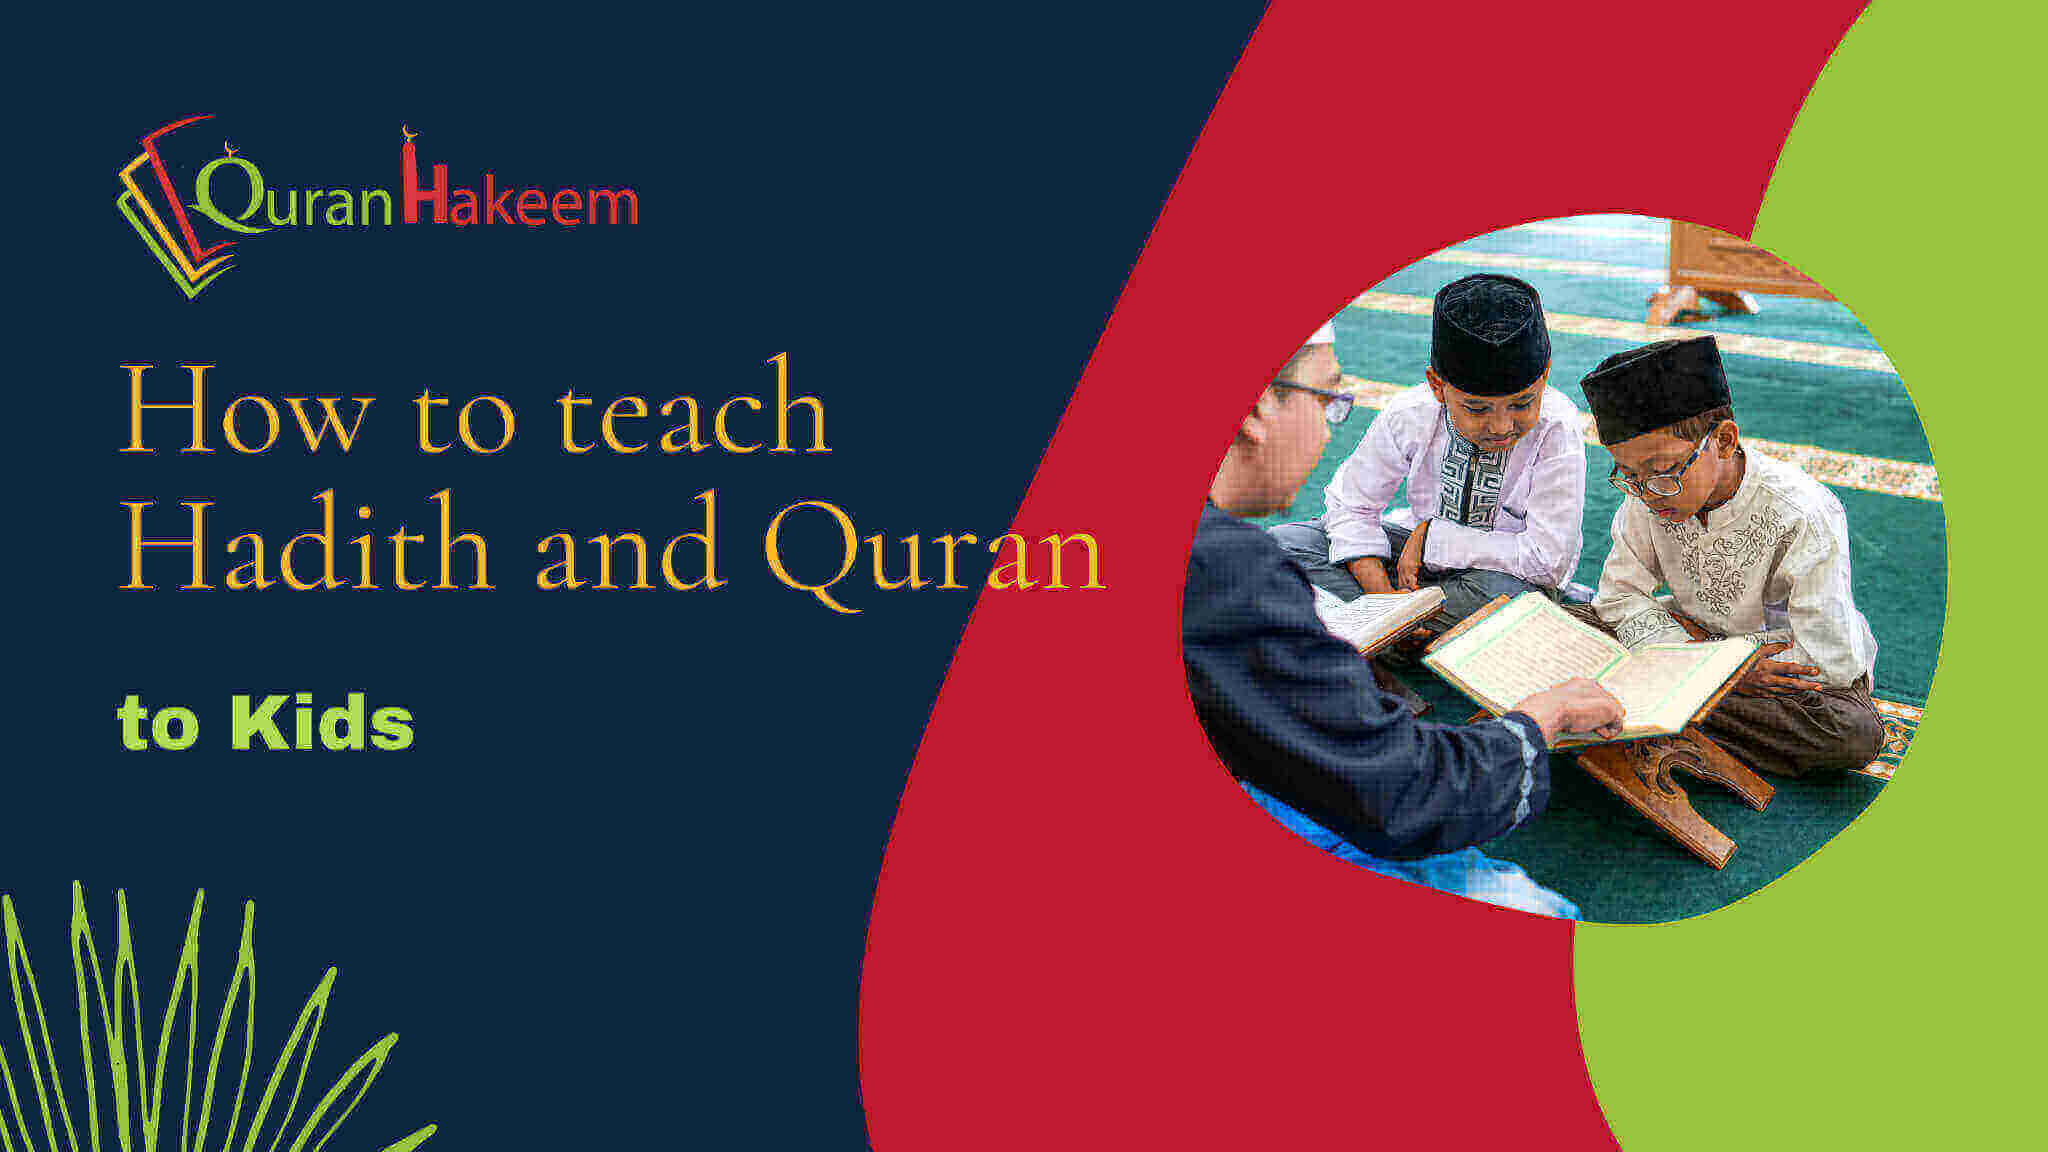 How to teach hadith and quran to kids